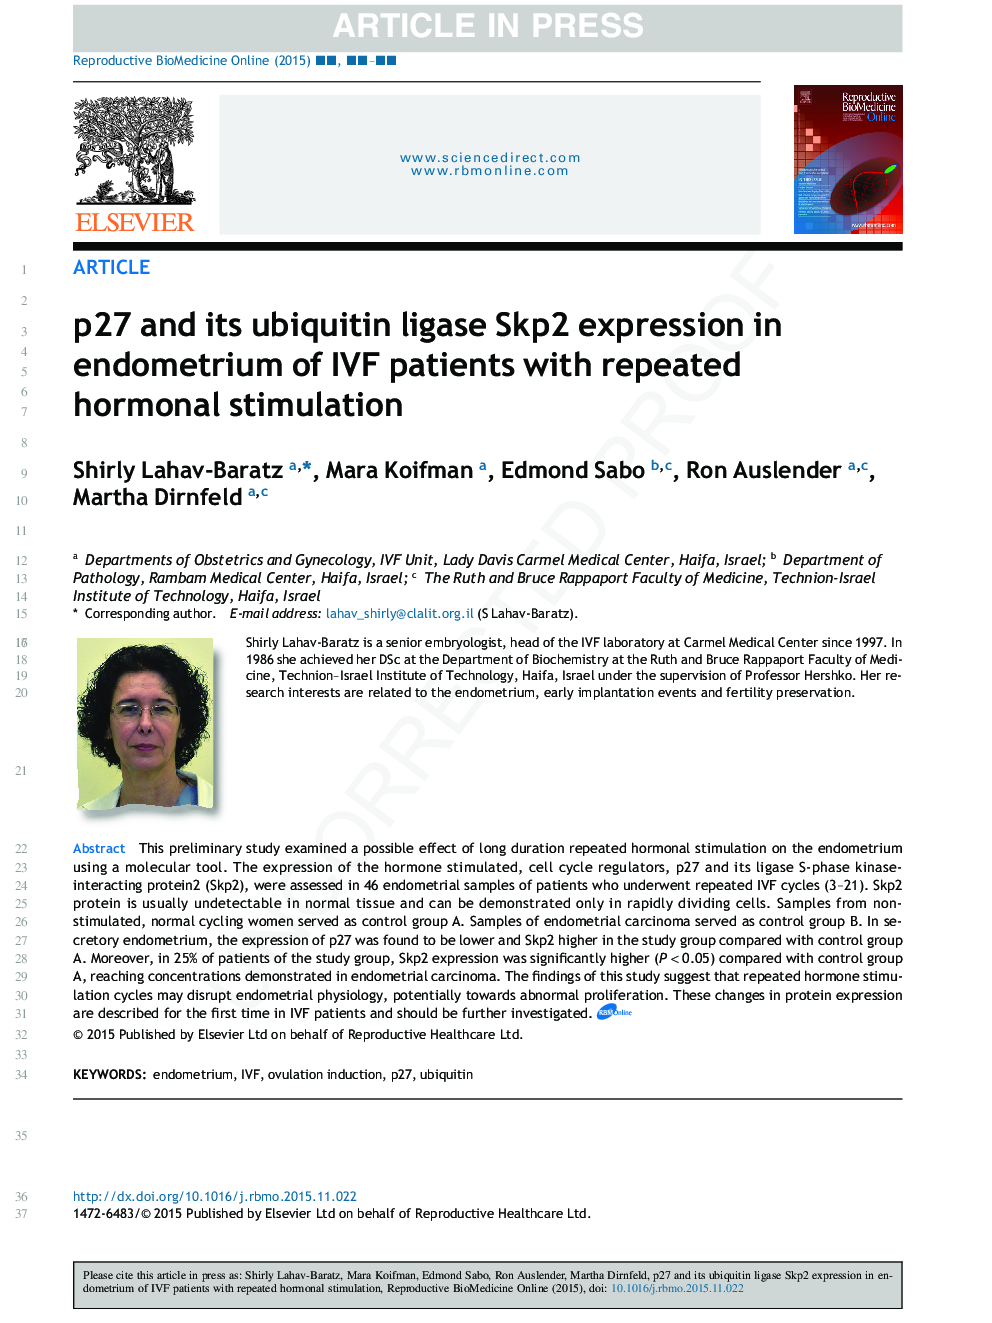 p27 and its ubiquitin ligase Skp2 expression in endometrium of IVF patients with repeated hormonal stimulation